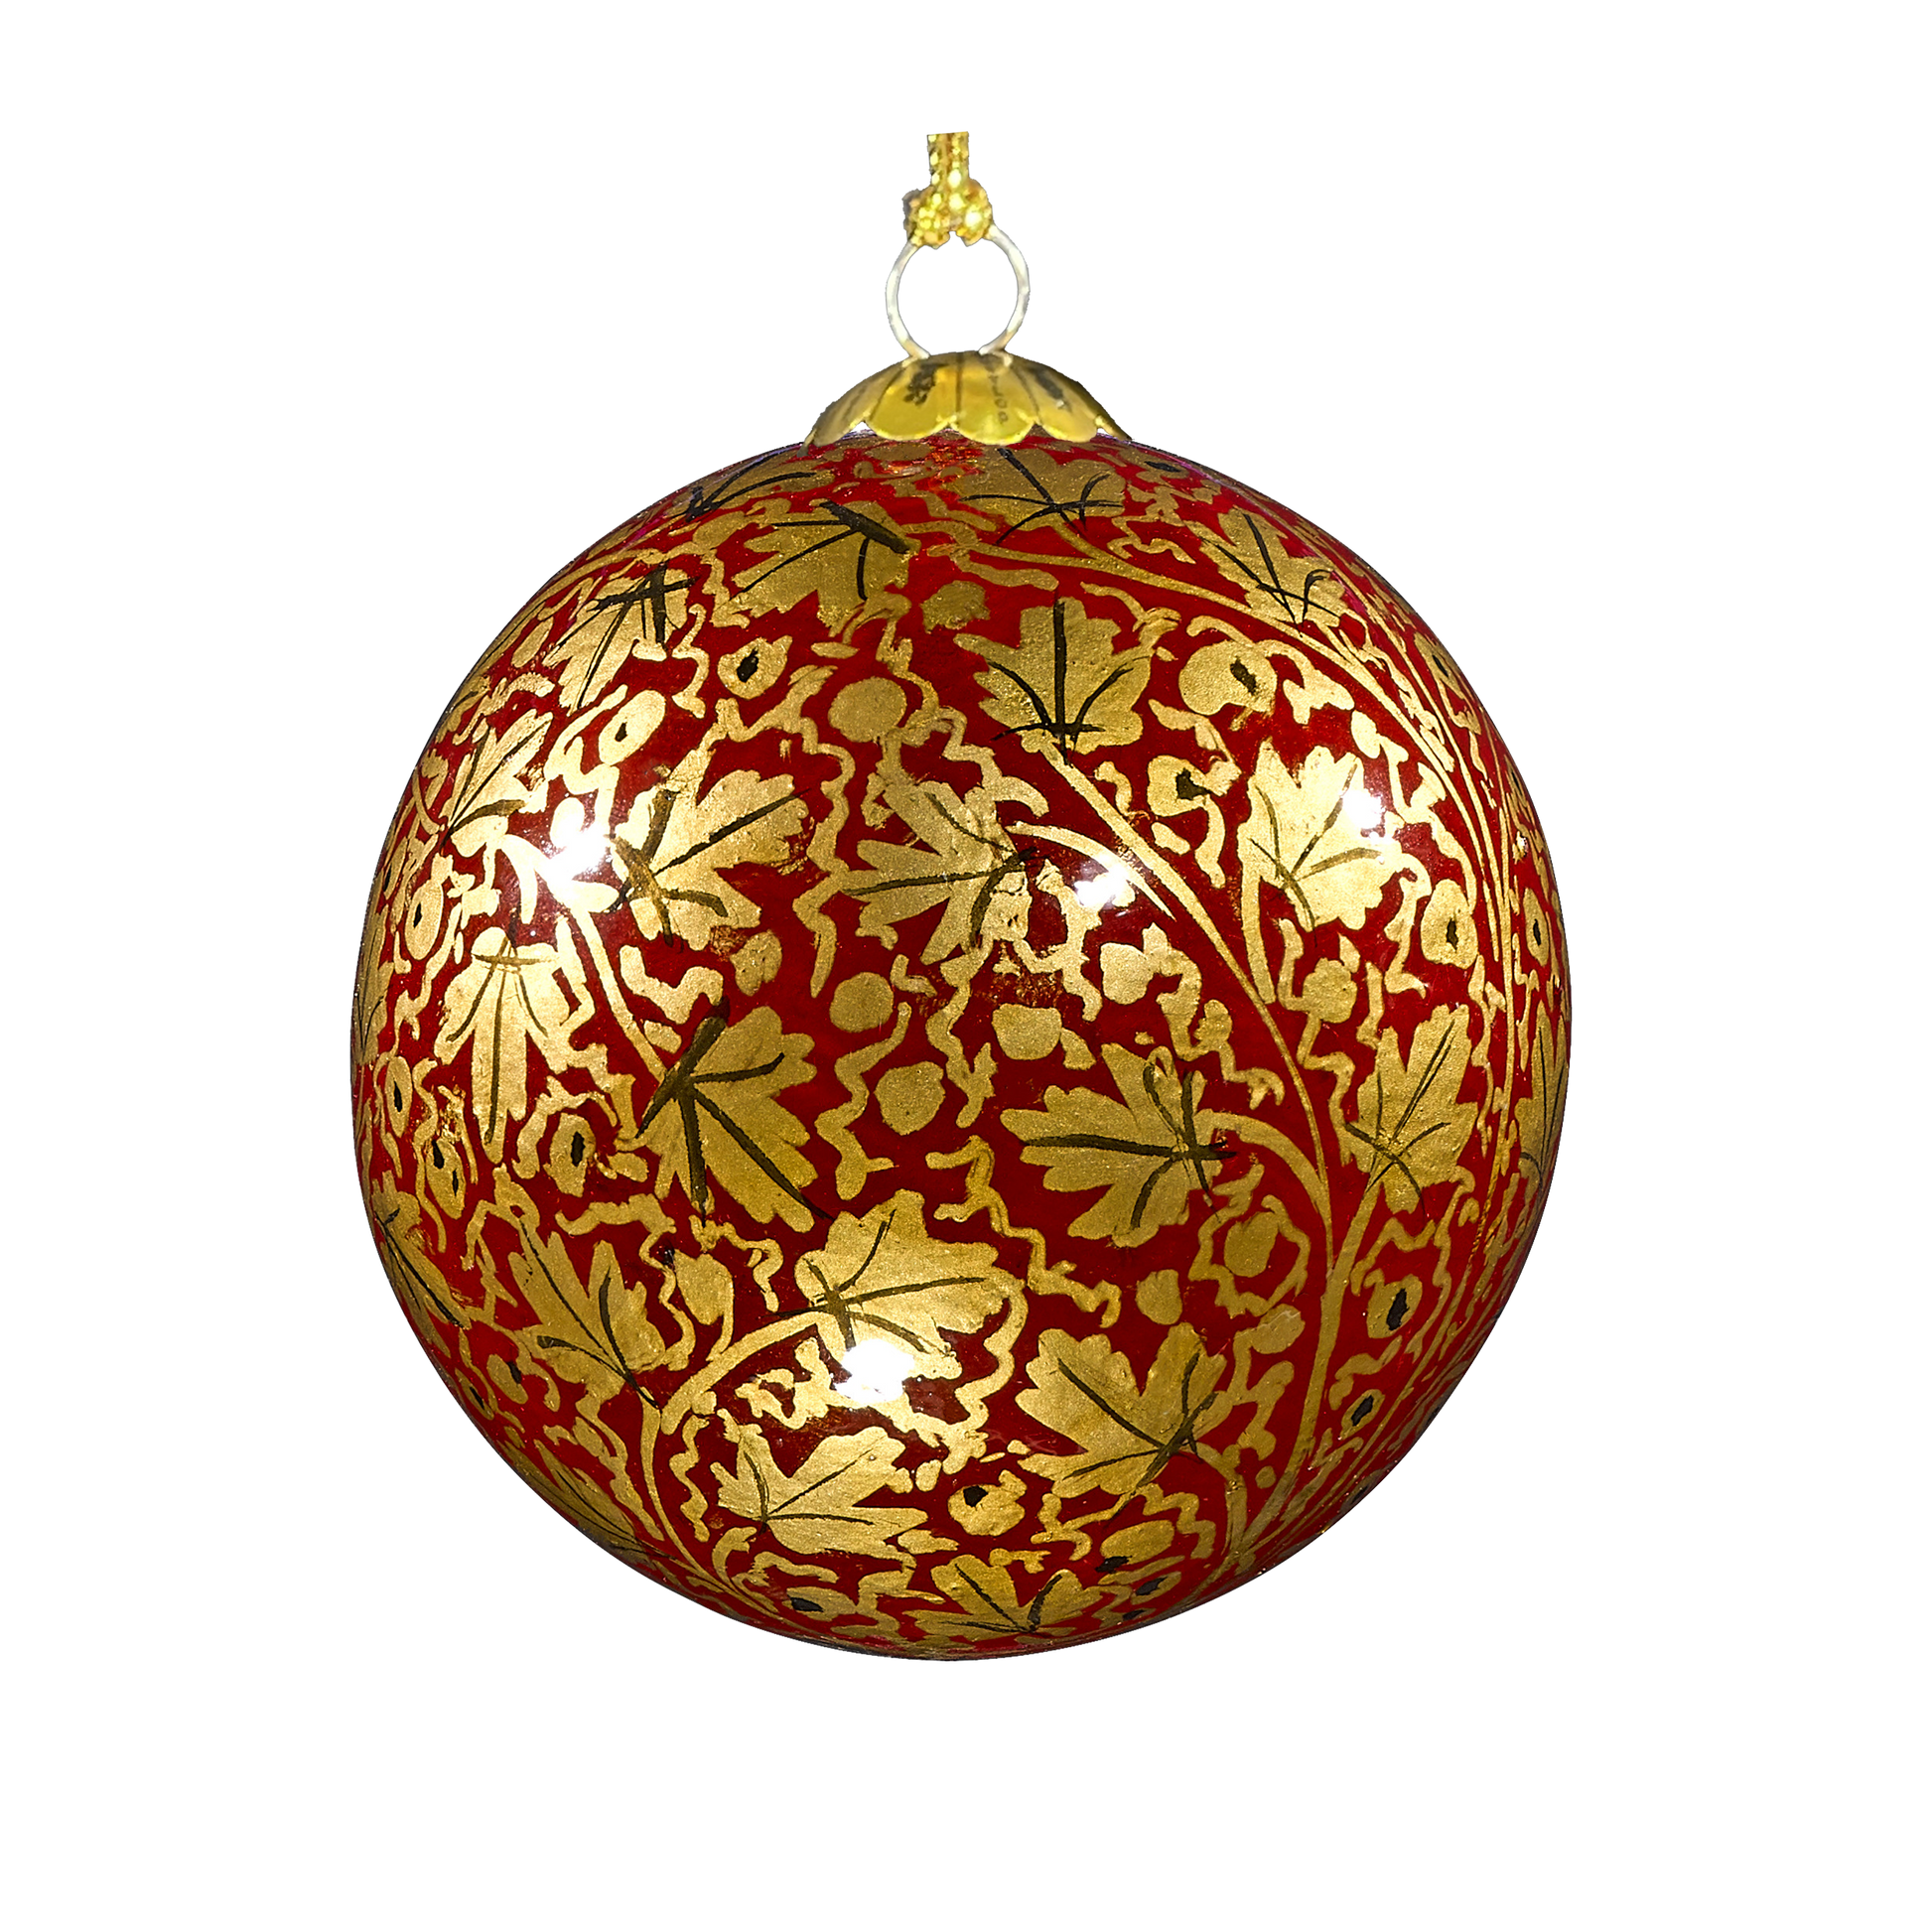 Golden Christmas Bauble for Christmas tree decorations